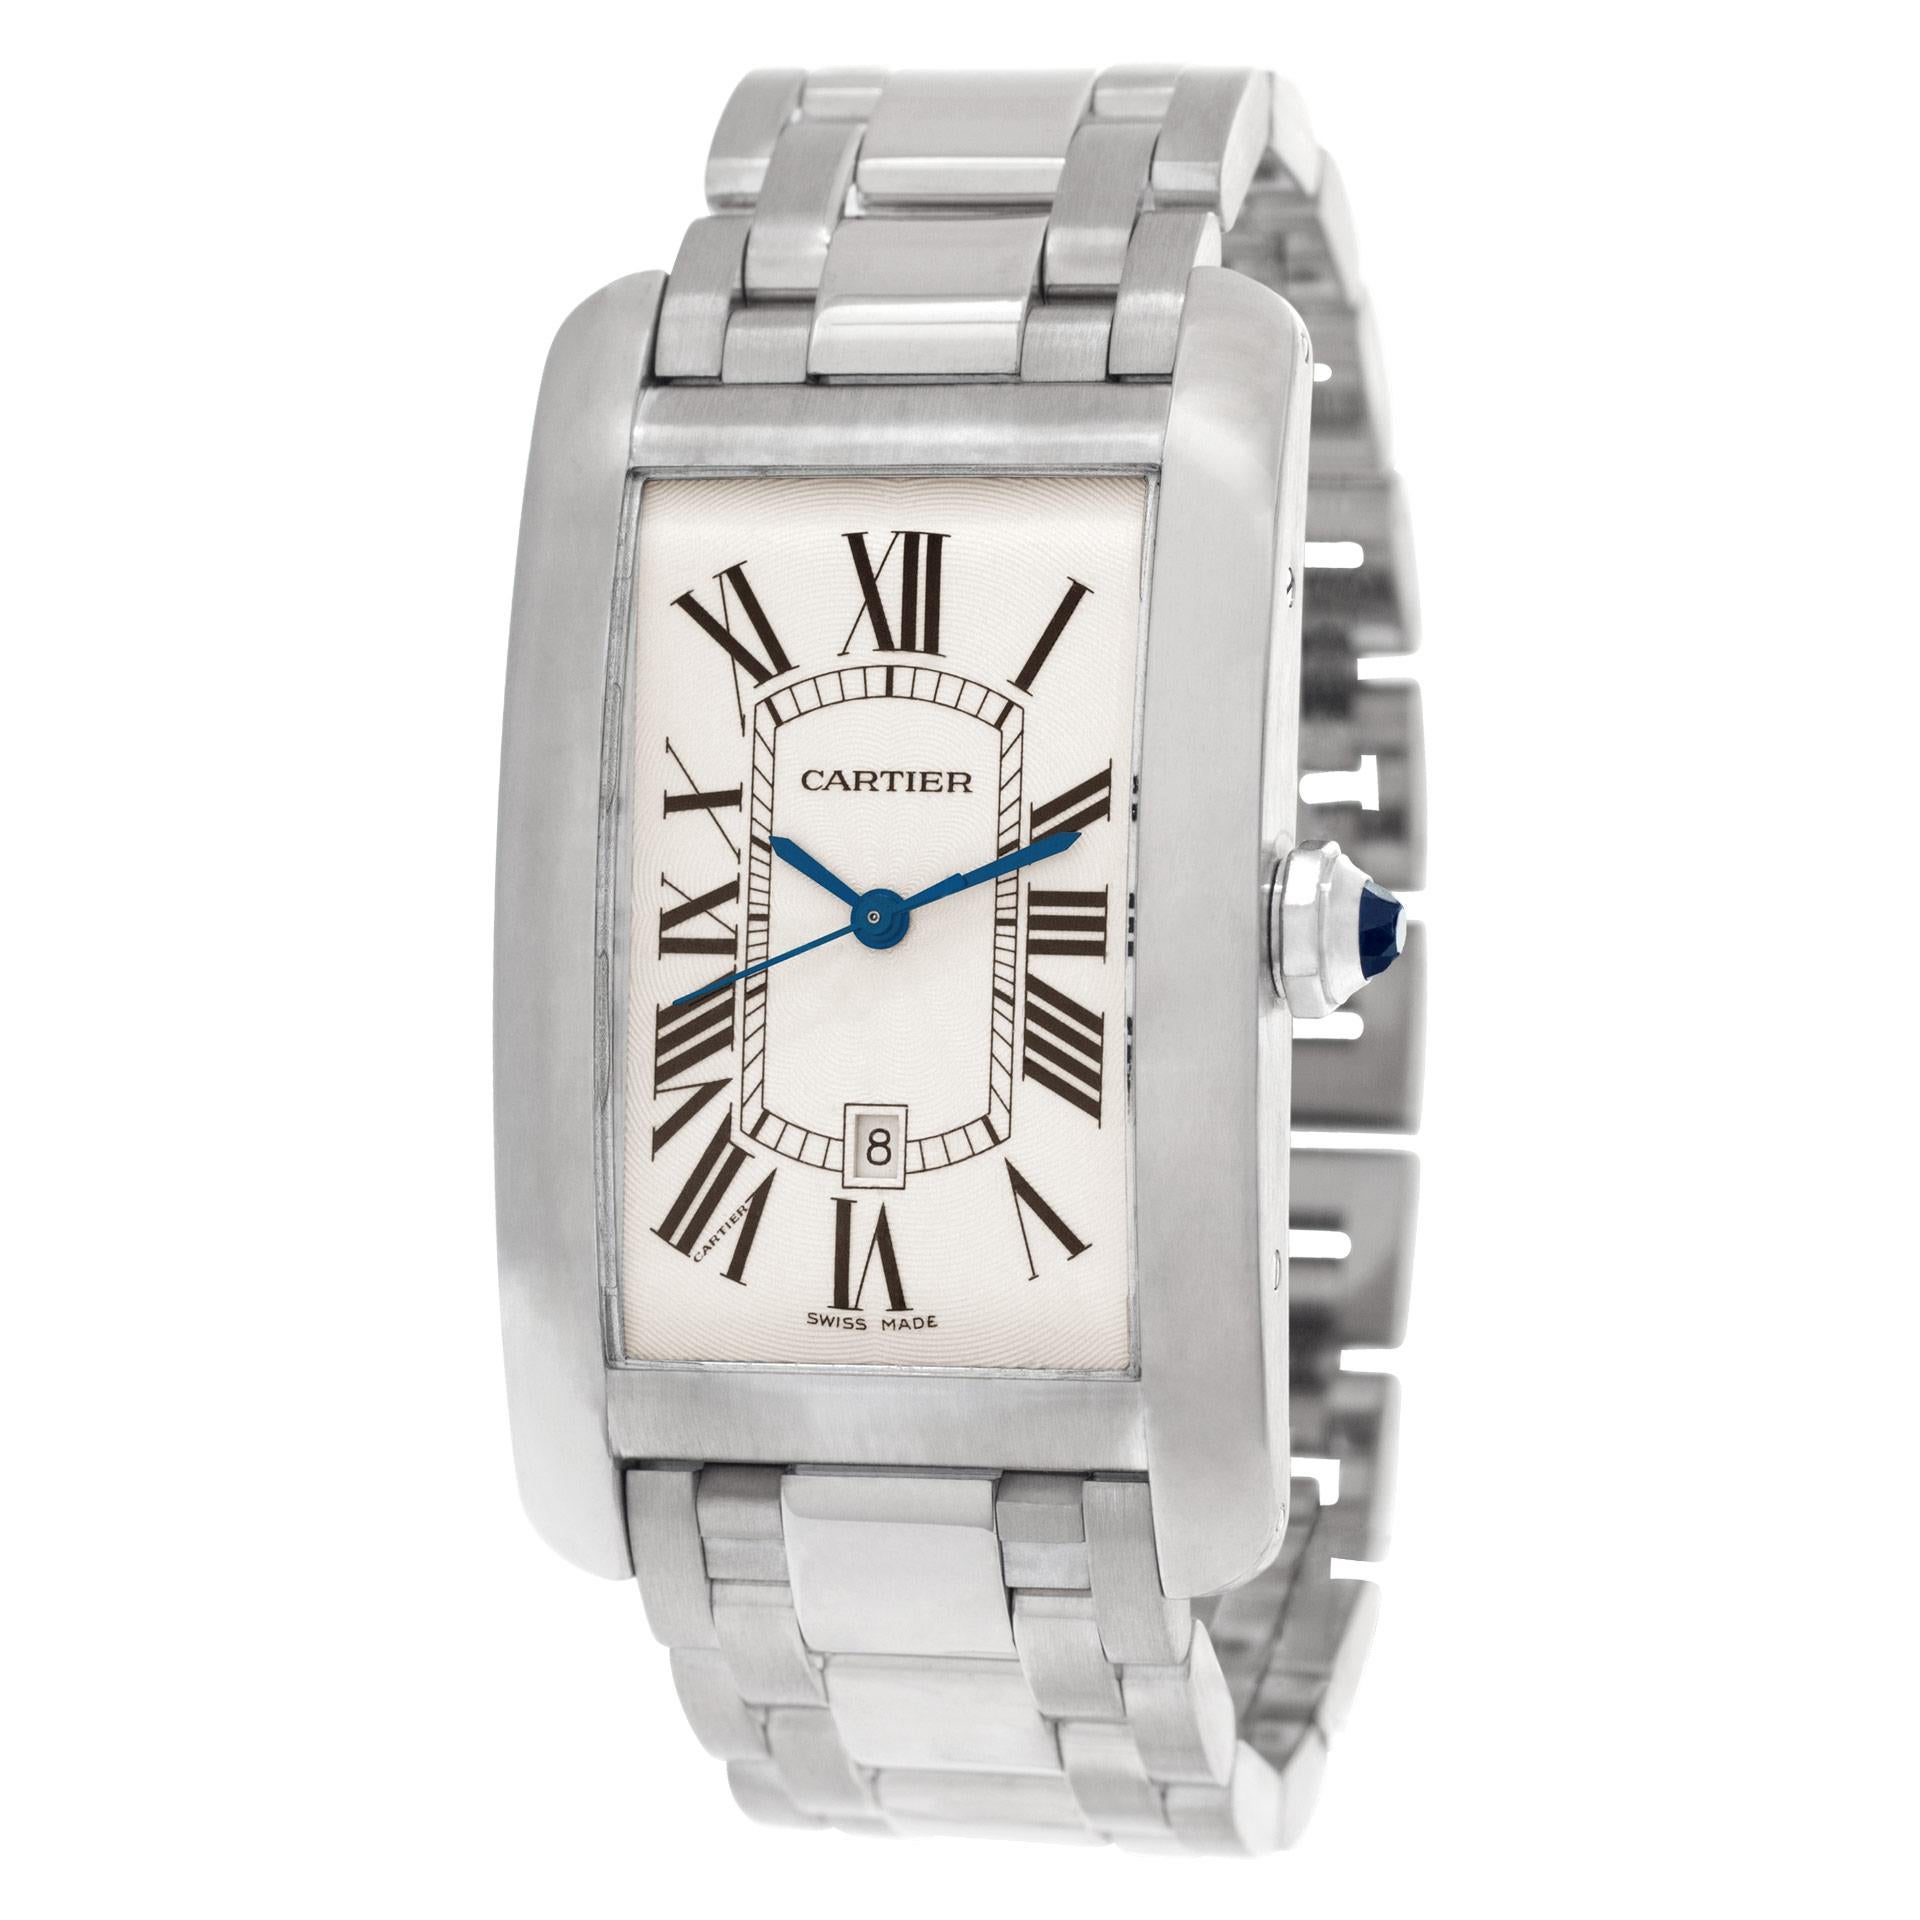 Cartier Tank Americaine XL in 18k white gold with white dial , date display above the 6 and black Roman numeral hour markers. Auto w/ sweep seconds and date. 26 mm width x 45 mm length case size. Box and papers. Ref W2605511. Circa: 2013. Fine